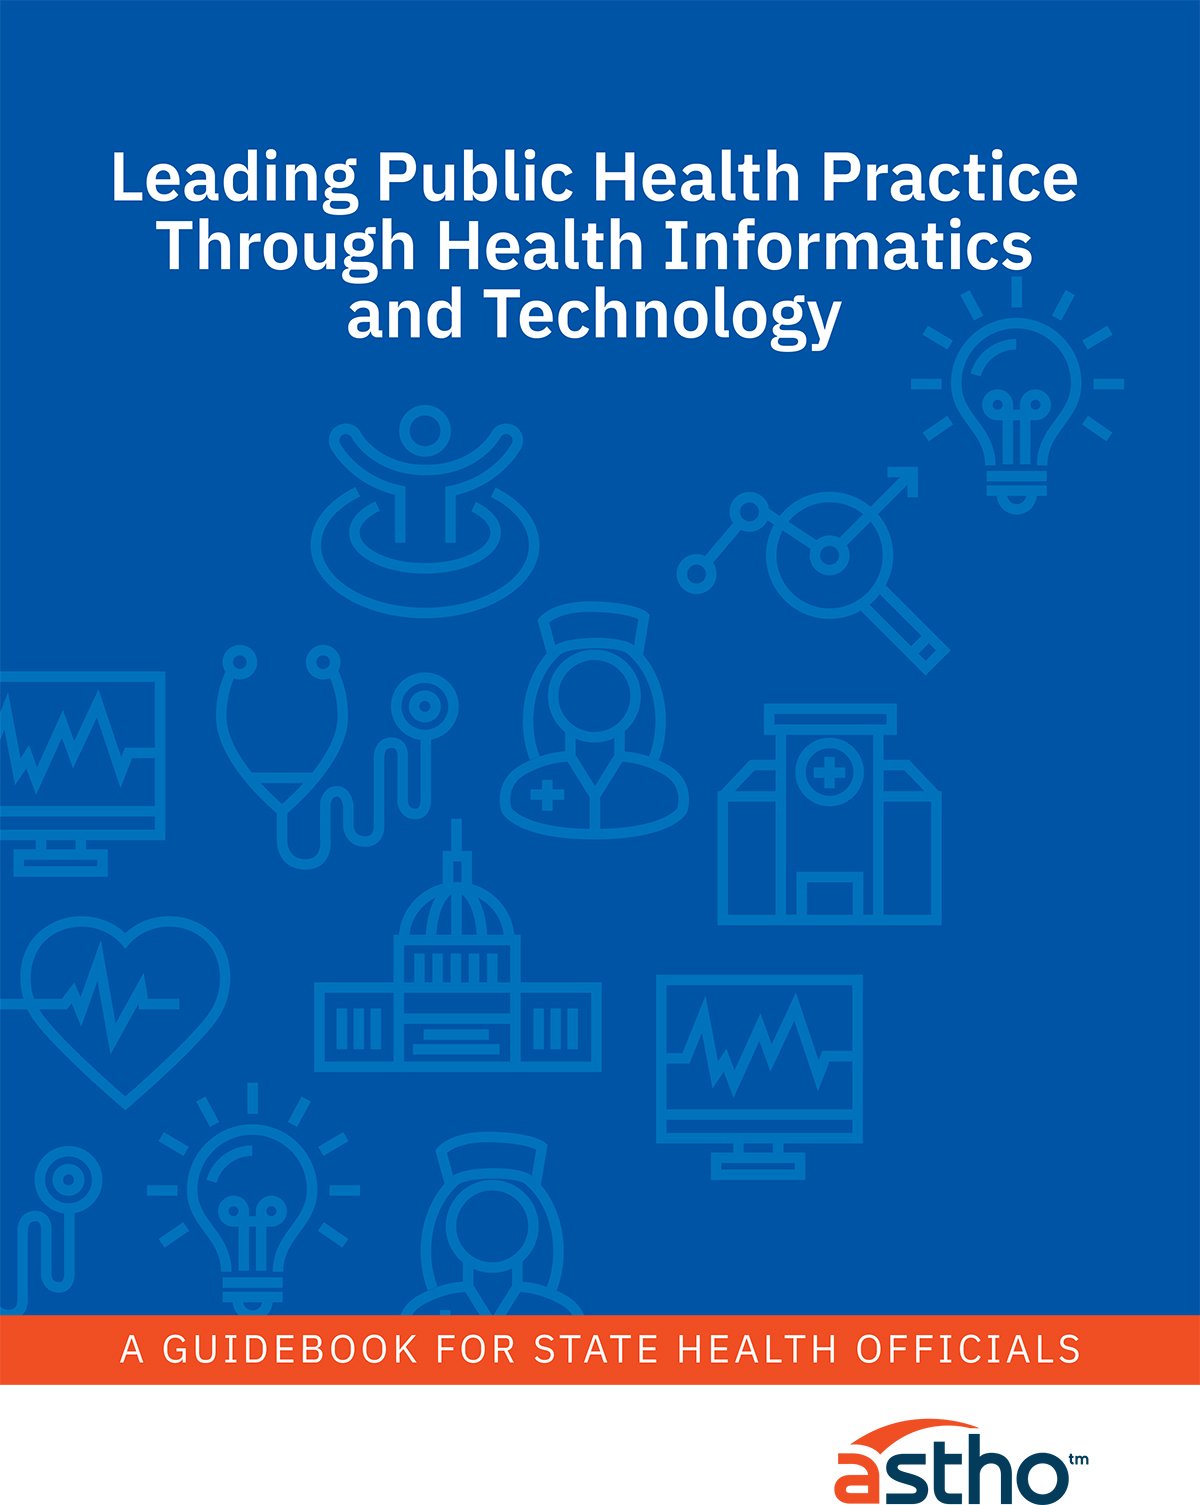 ASTHOReport: Leading Public Health Practice Though Health Informatics and Technology